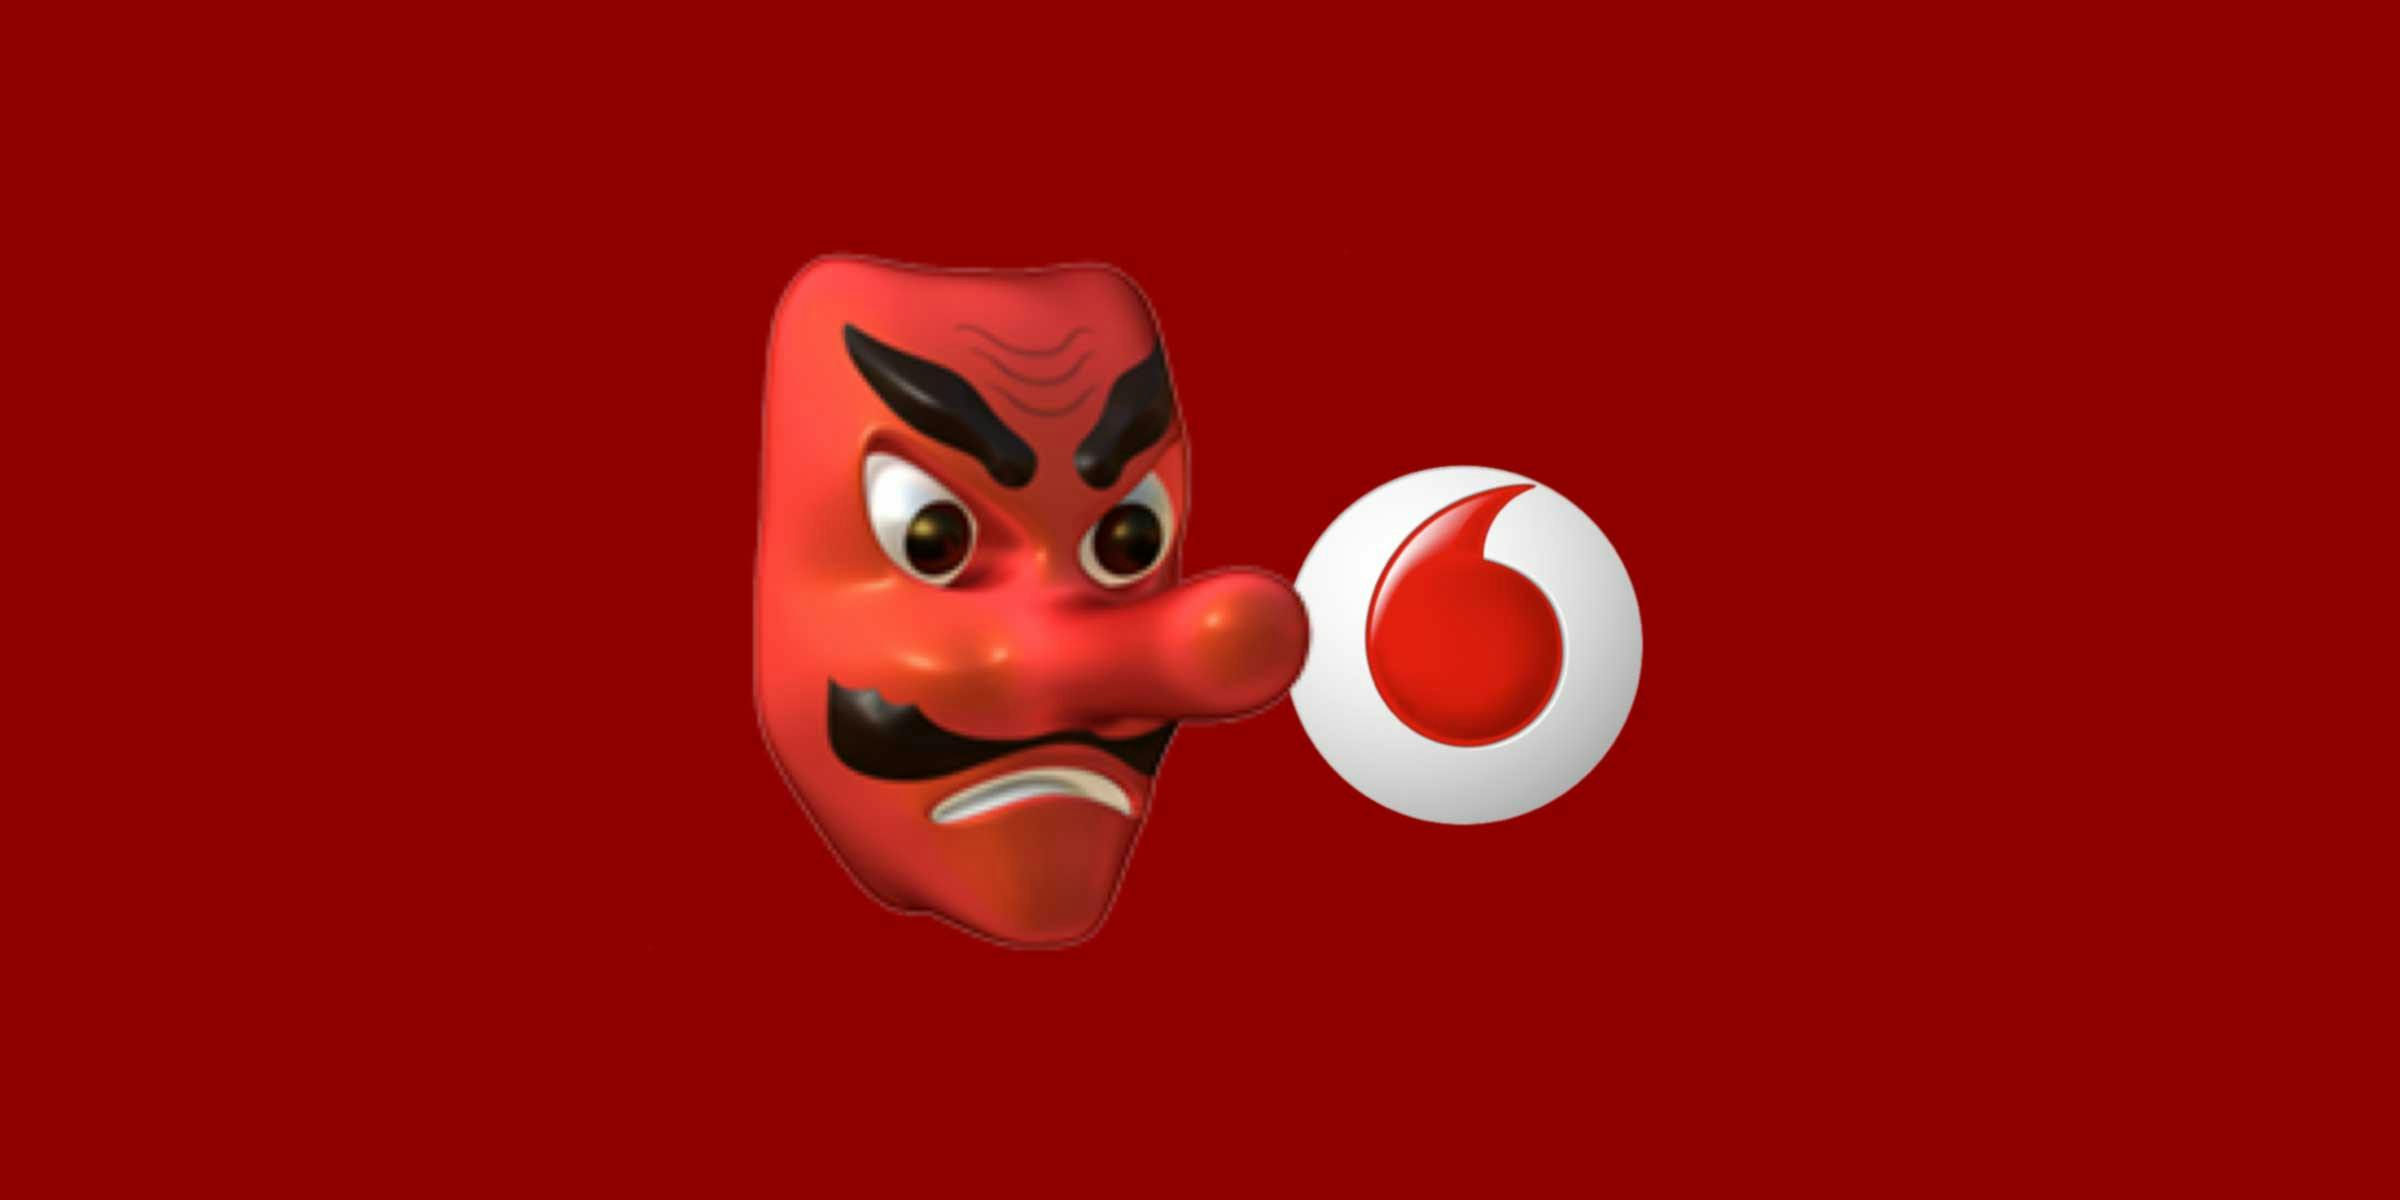 featured image - Dear Vodafone, please respect my privacy